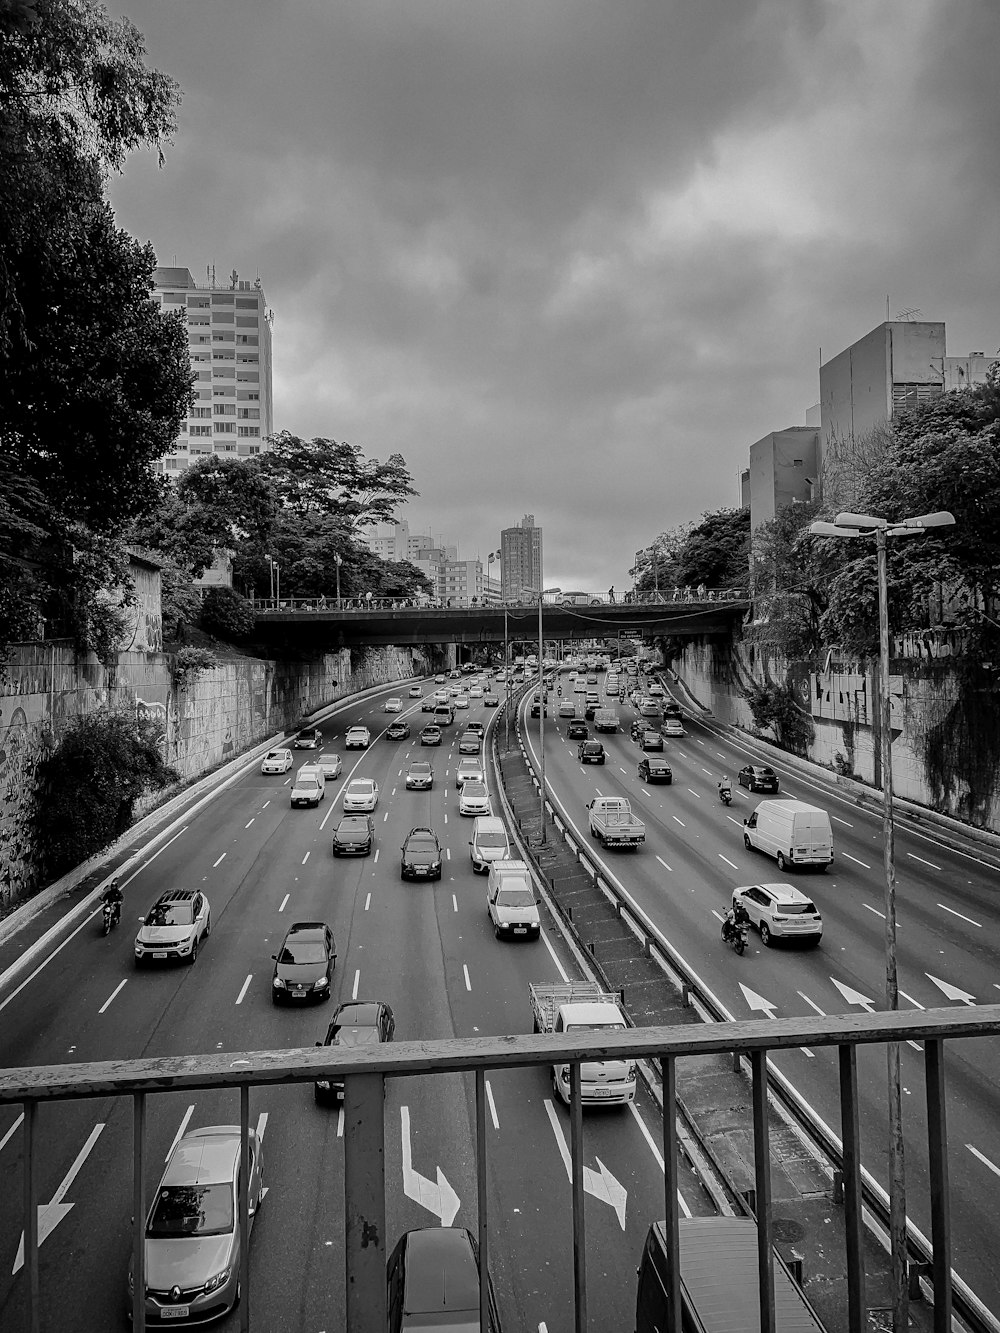 grayscale photography of different vehicles on road viewing city with high-rise buildings